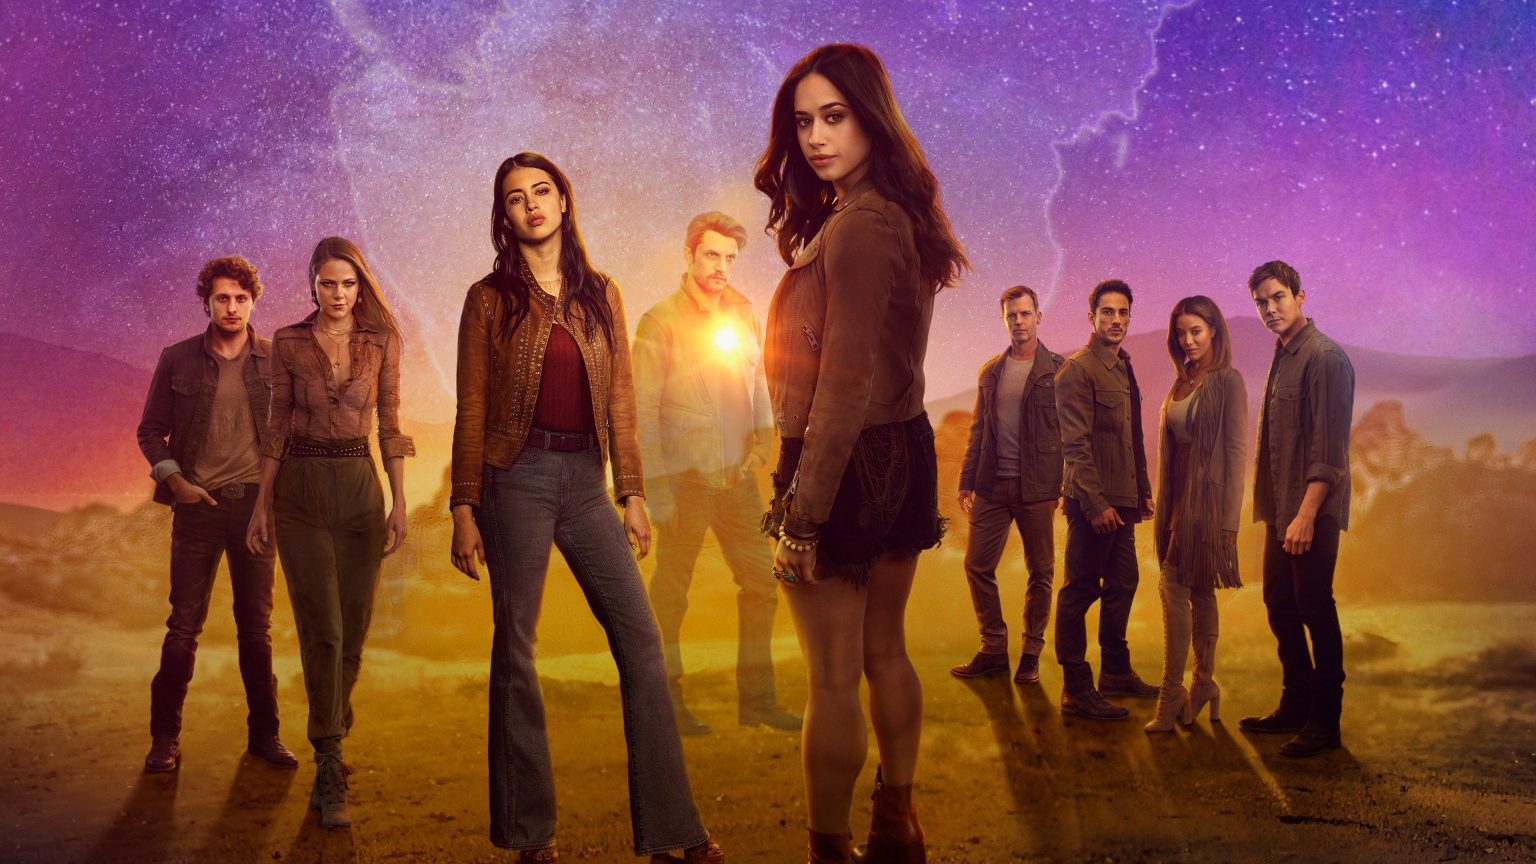 When will ‘Roswell, New Mexico’ Season 4 be on Netflix?